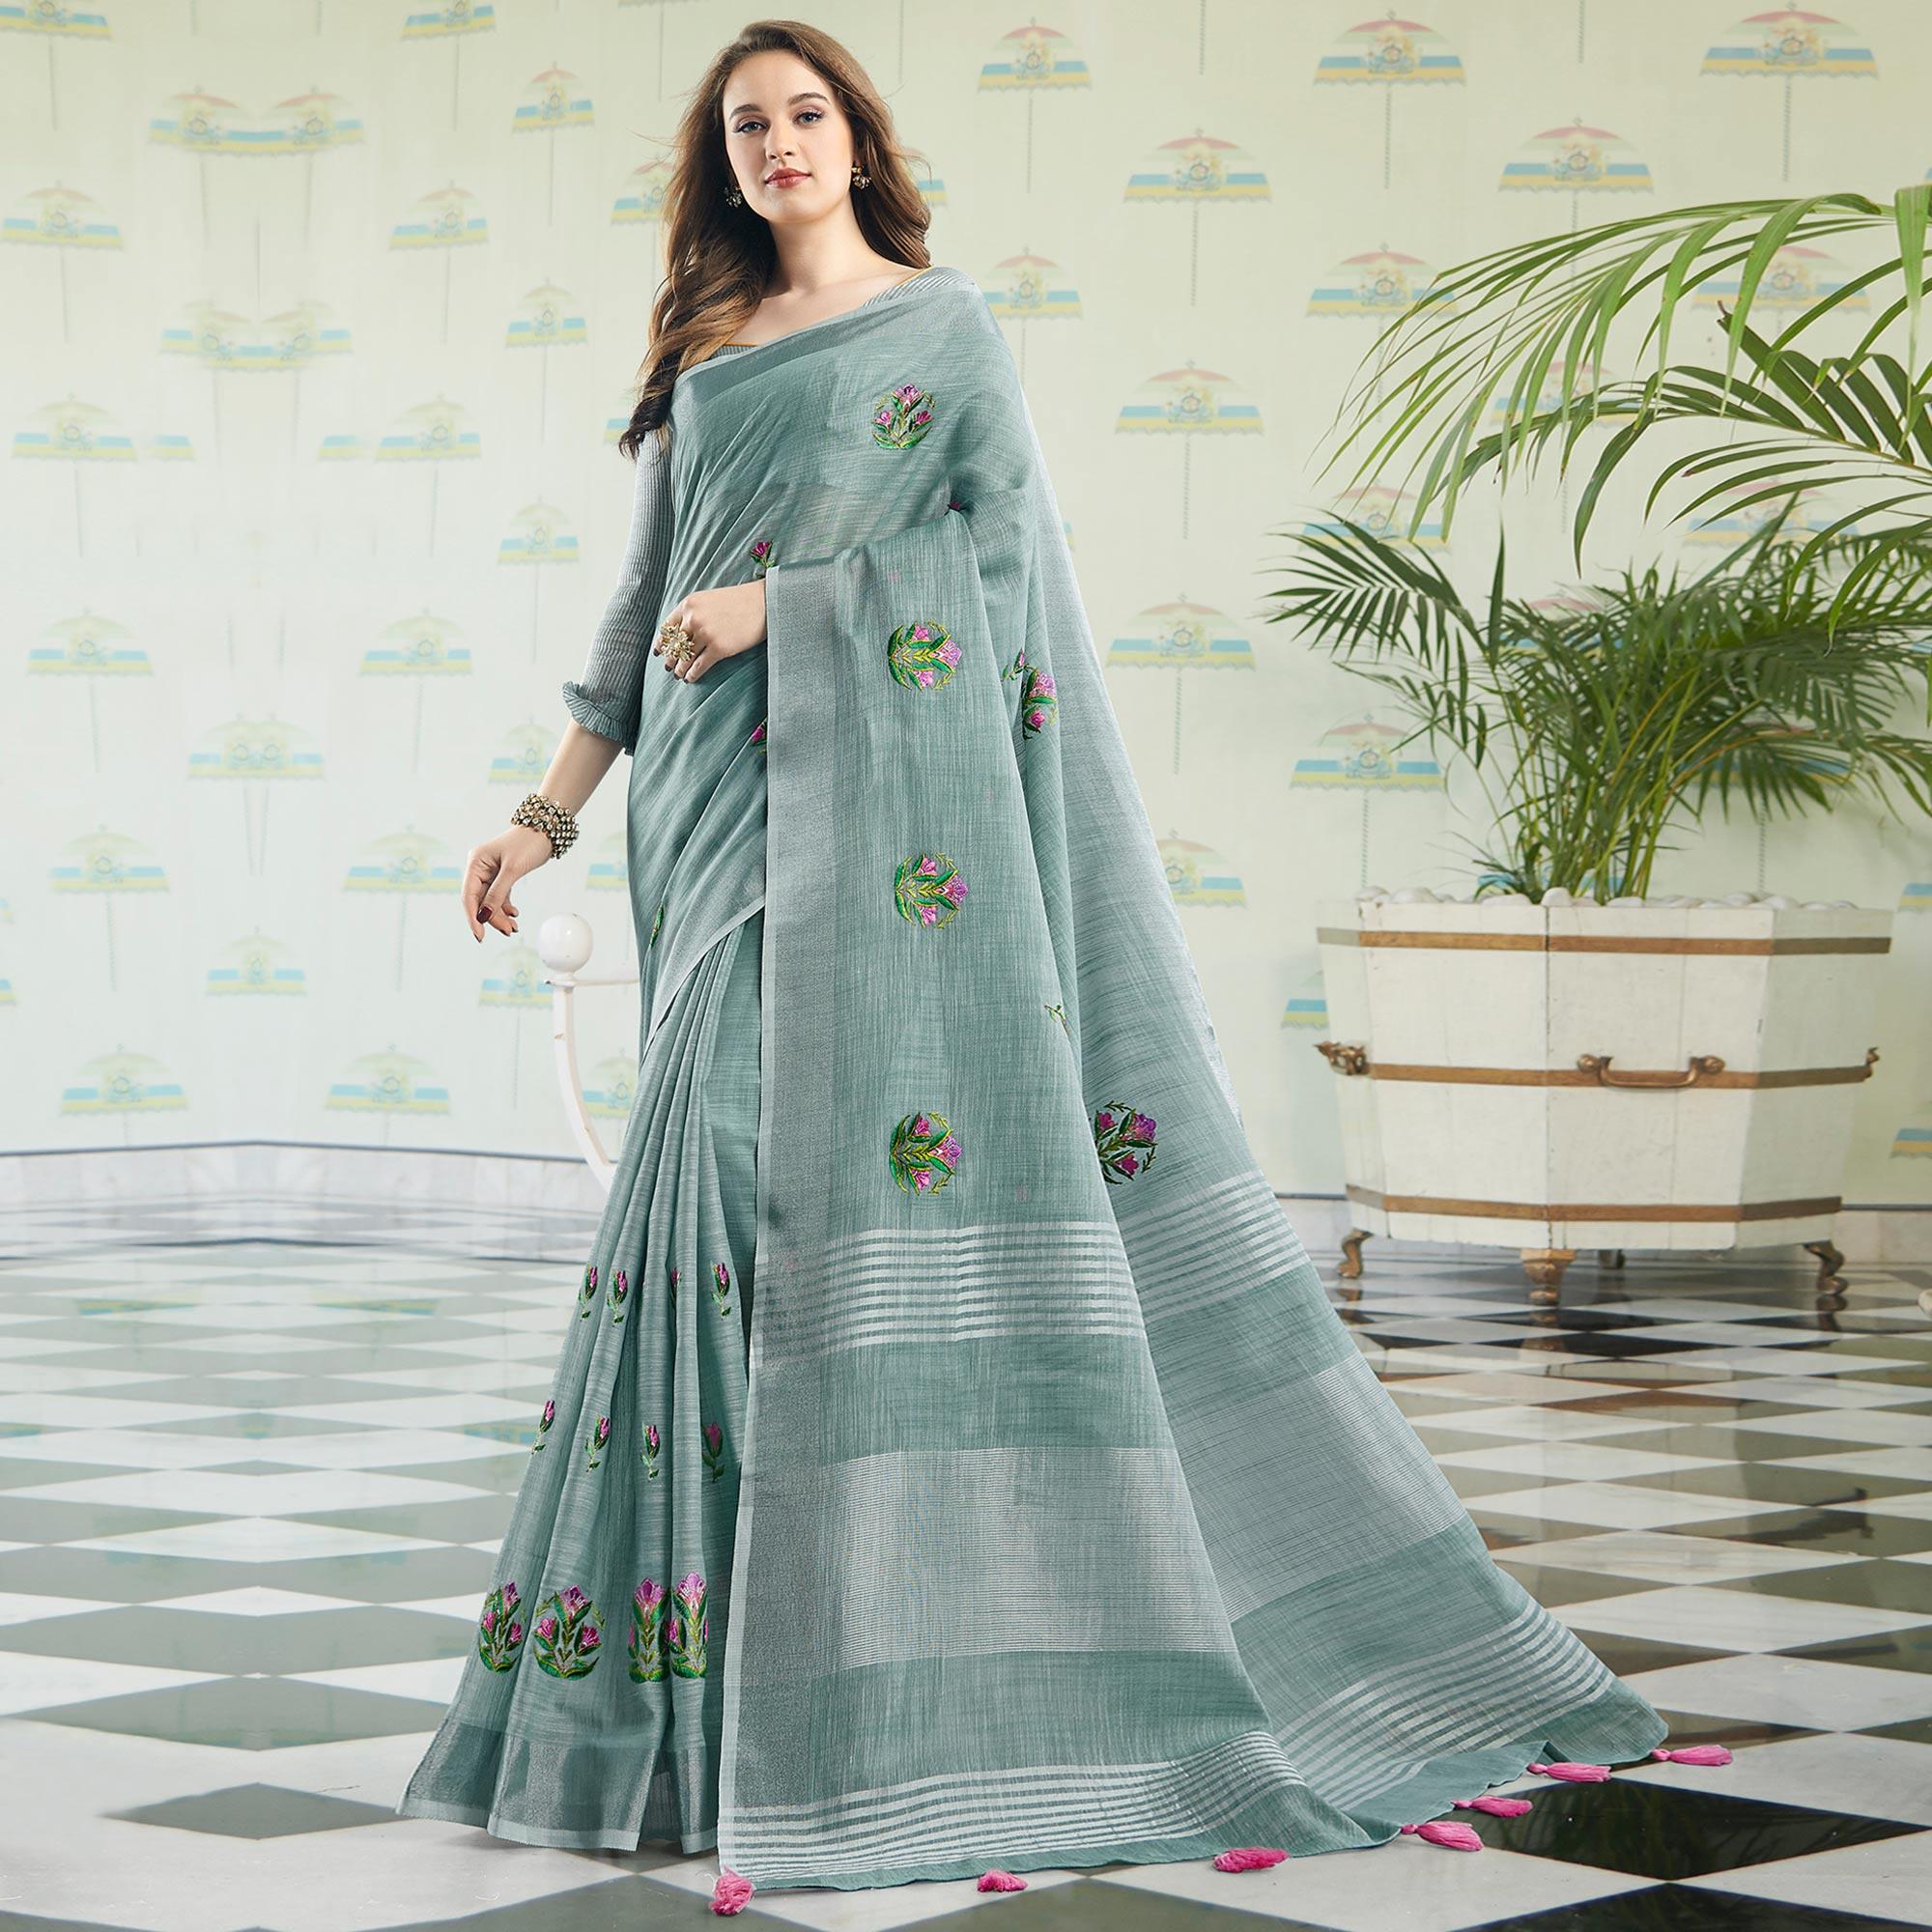 Intricate Pastel Blue Colored Casual Wear Floral Embroidered Linen-Cotton Saree With Tassels - Peachmode